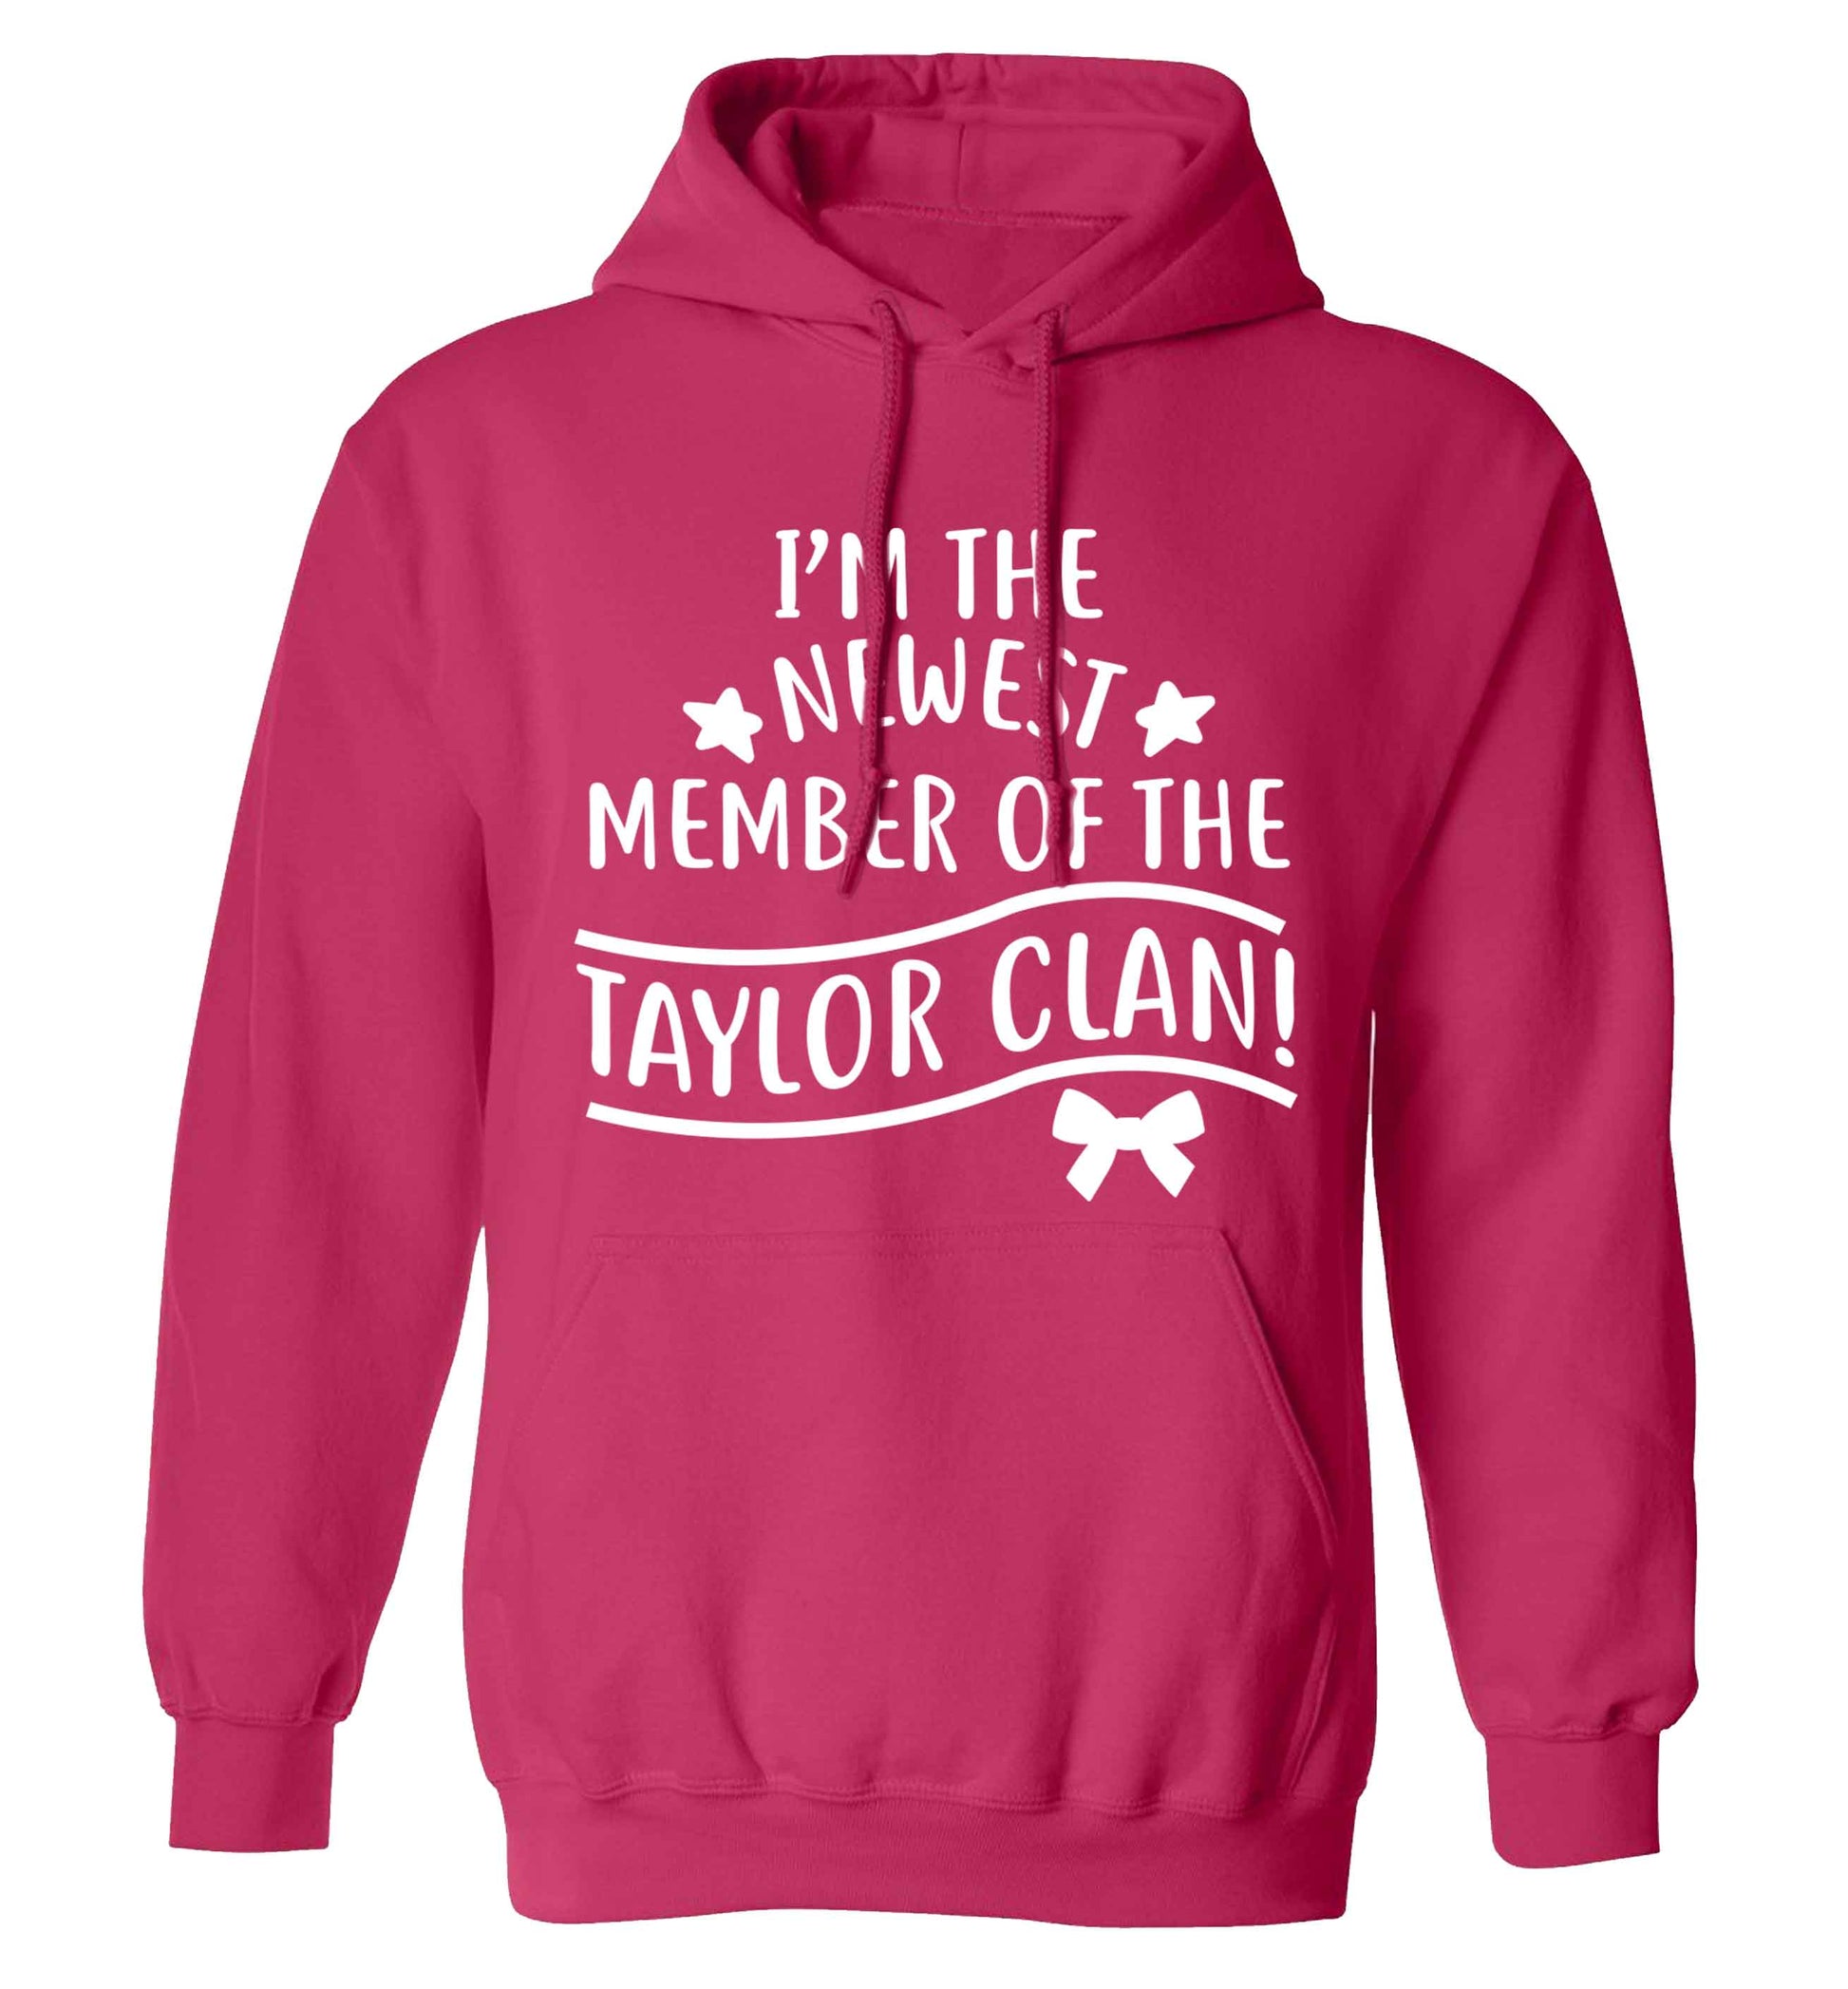 Personalised, newest member of the Taylor clan adults unisex pink hoodie 2XL